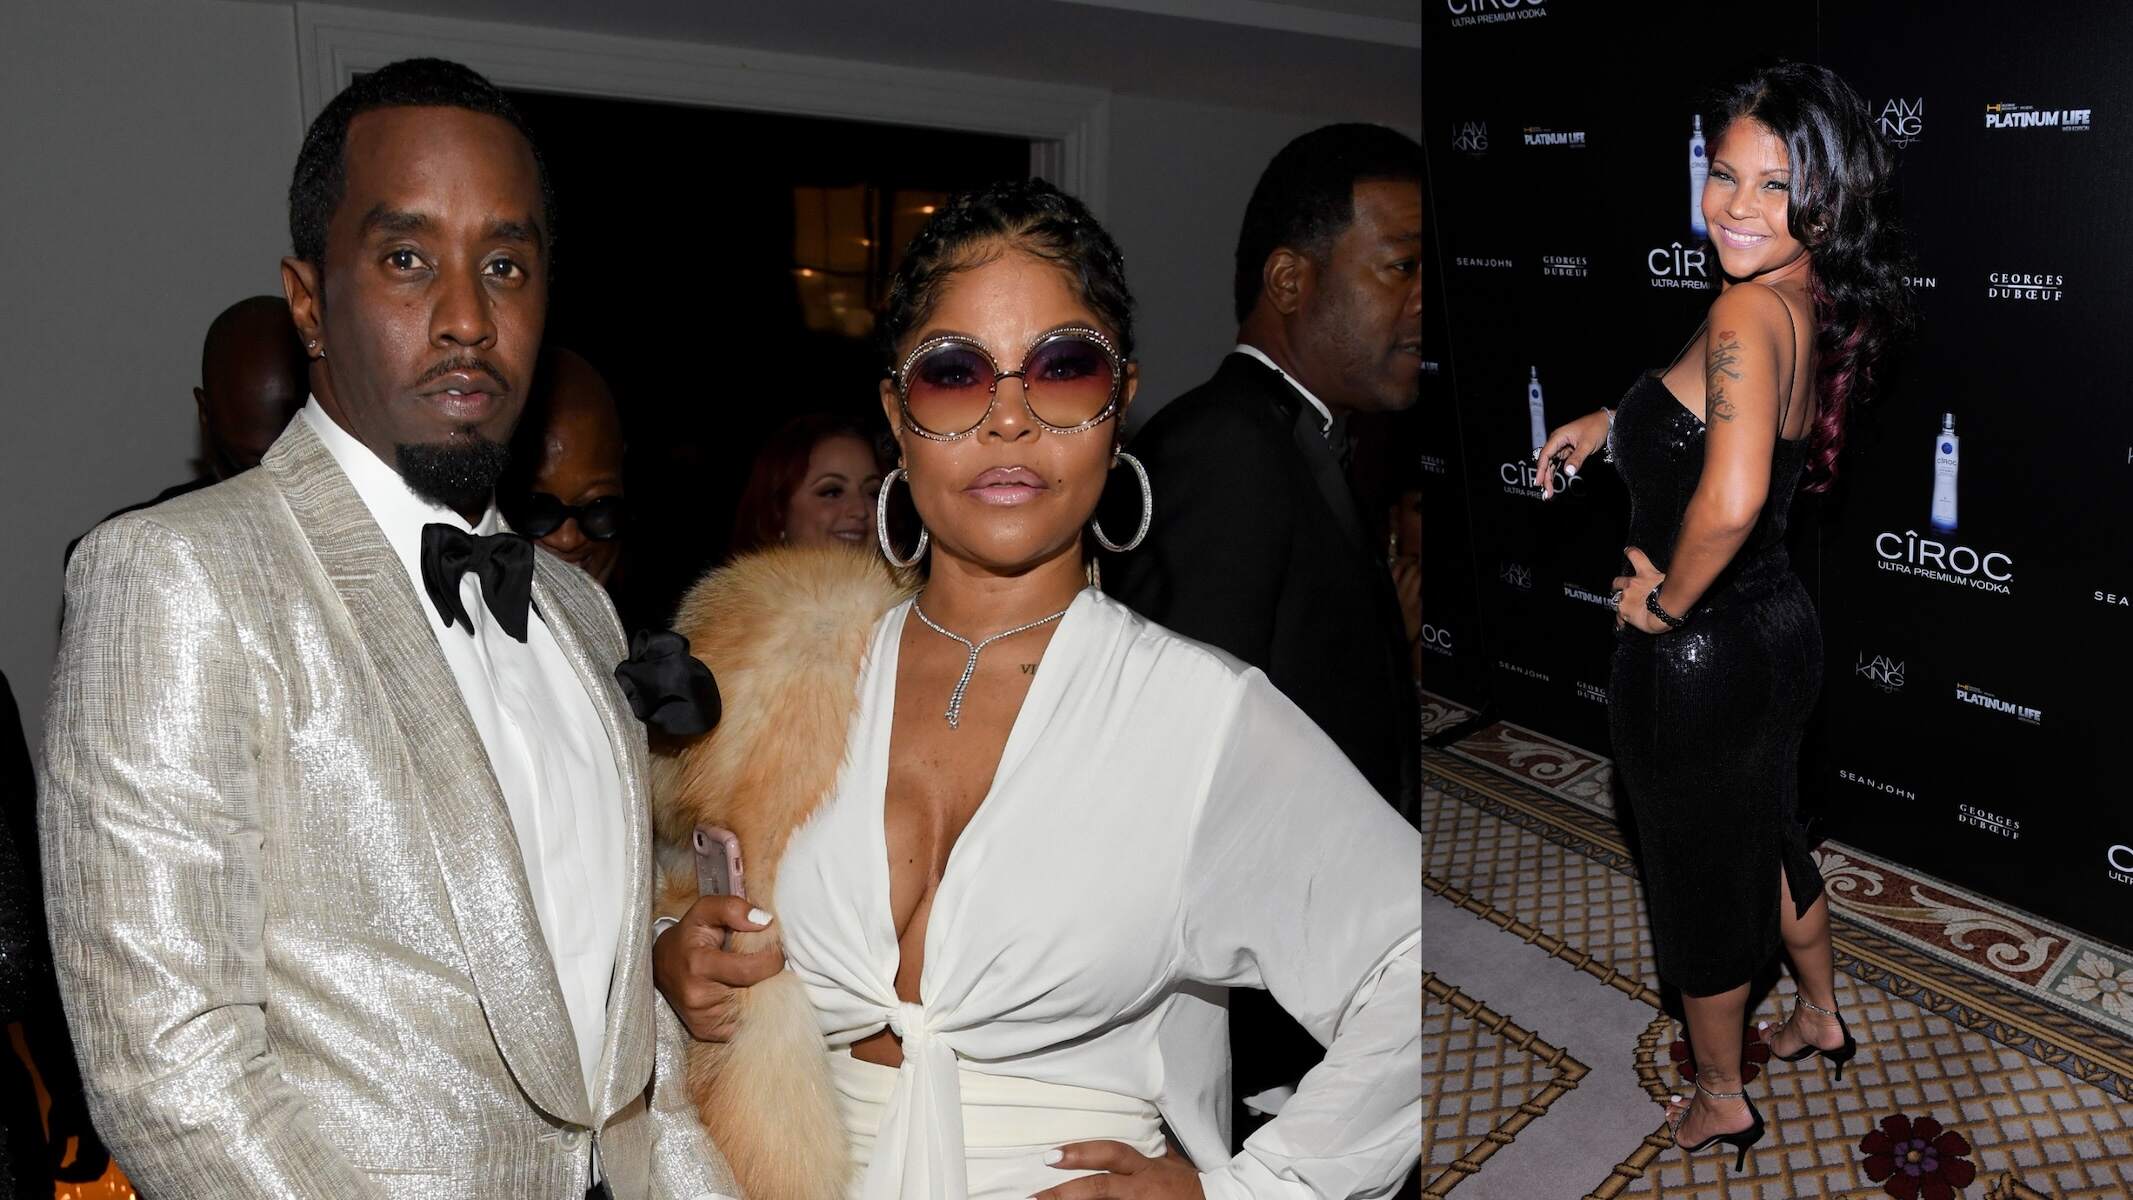 A photo of Diddy and Misa Hylton in white formalwear alongside a photo of Misa smiling in a black dress